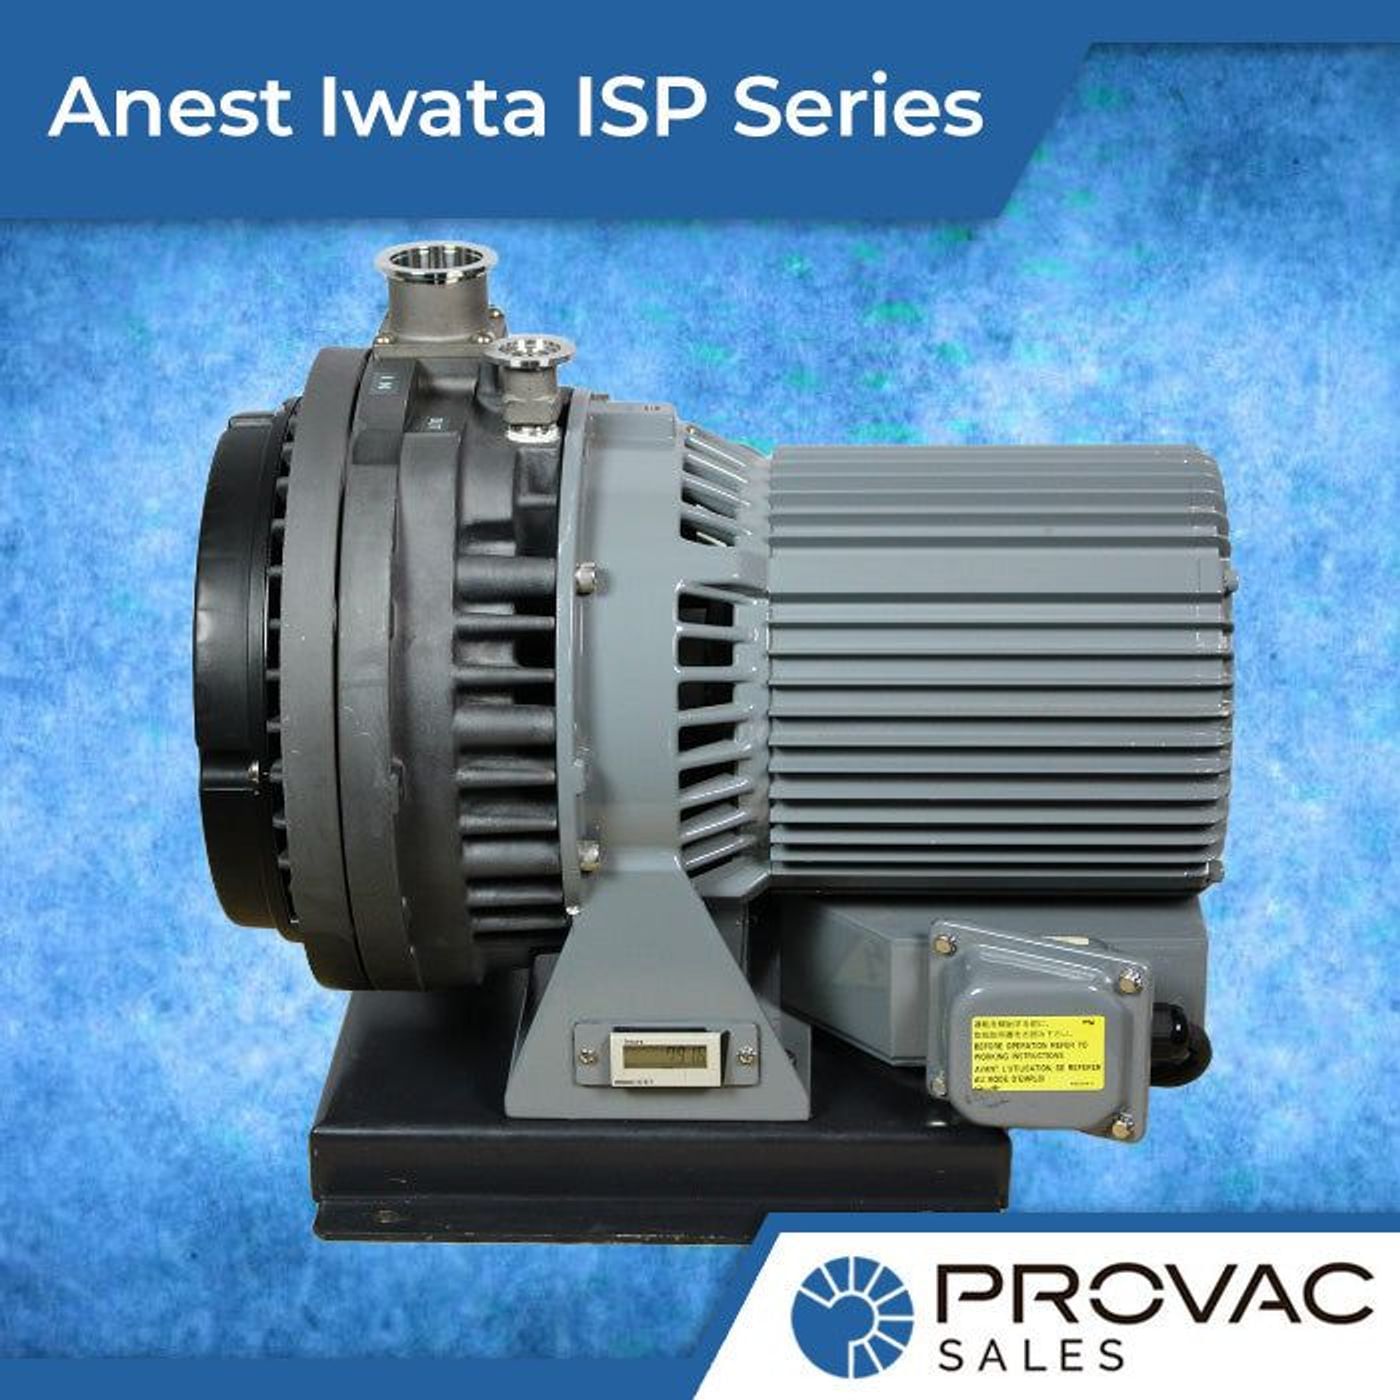 Anest Iwata ISP Dry Scroll Roughing Pump Series